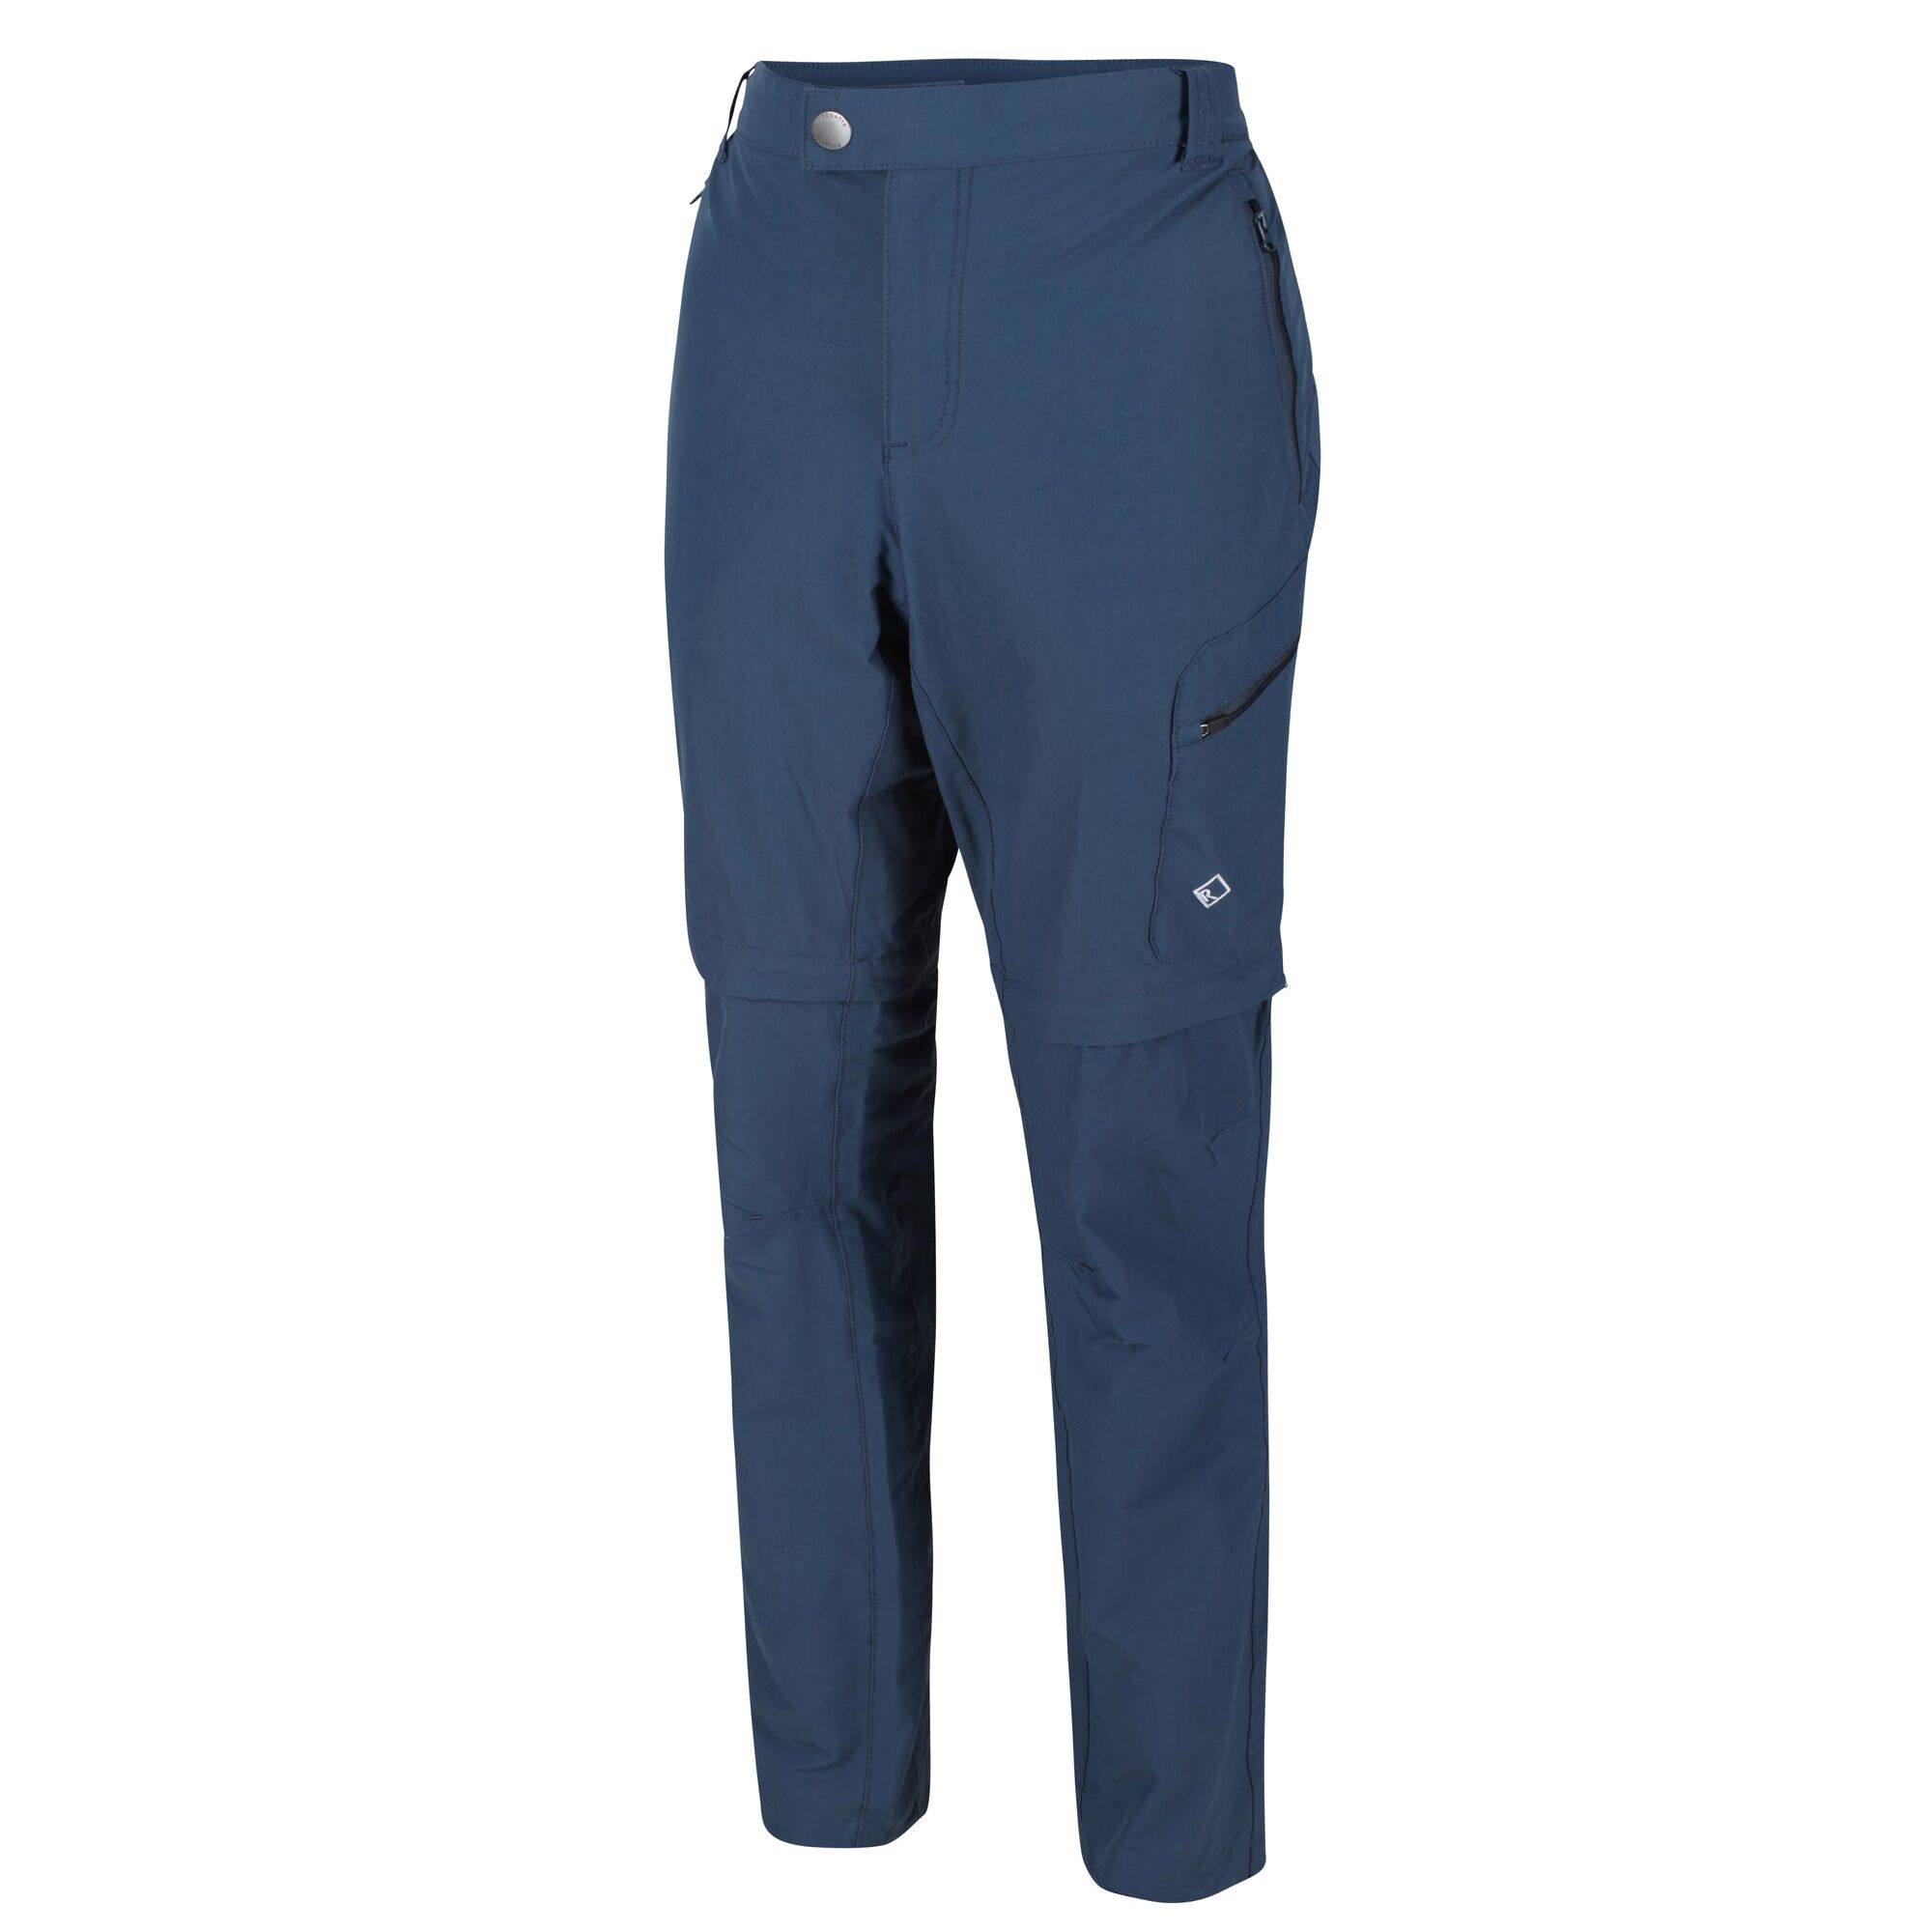 92% polyamide, 8% elastane. UV protection (UPF 40+). Iso-flex full active Stretch fabric. Durable water repellent finish. Part elasticated waist. Multi pocketed with zipped side pockets. Available in short, regular and long leg lengths. Length guide: S 30in, M 32in, L 34in.